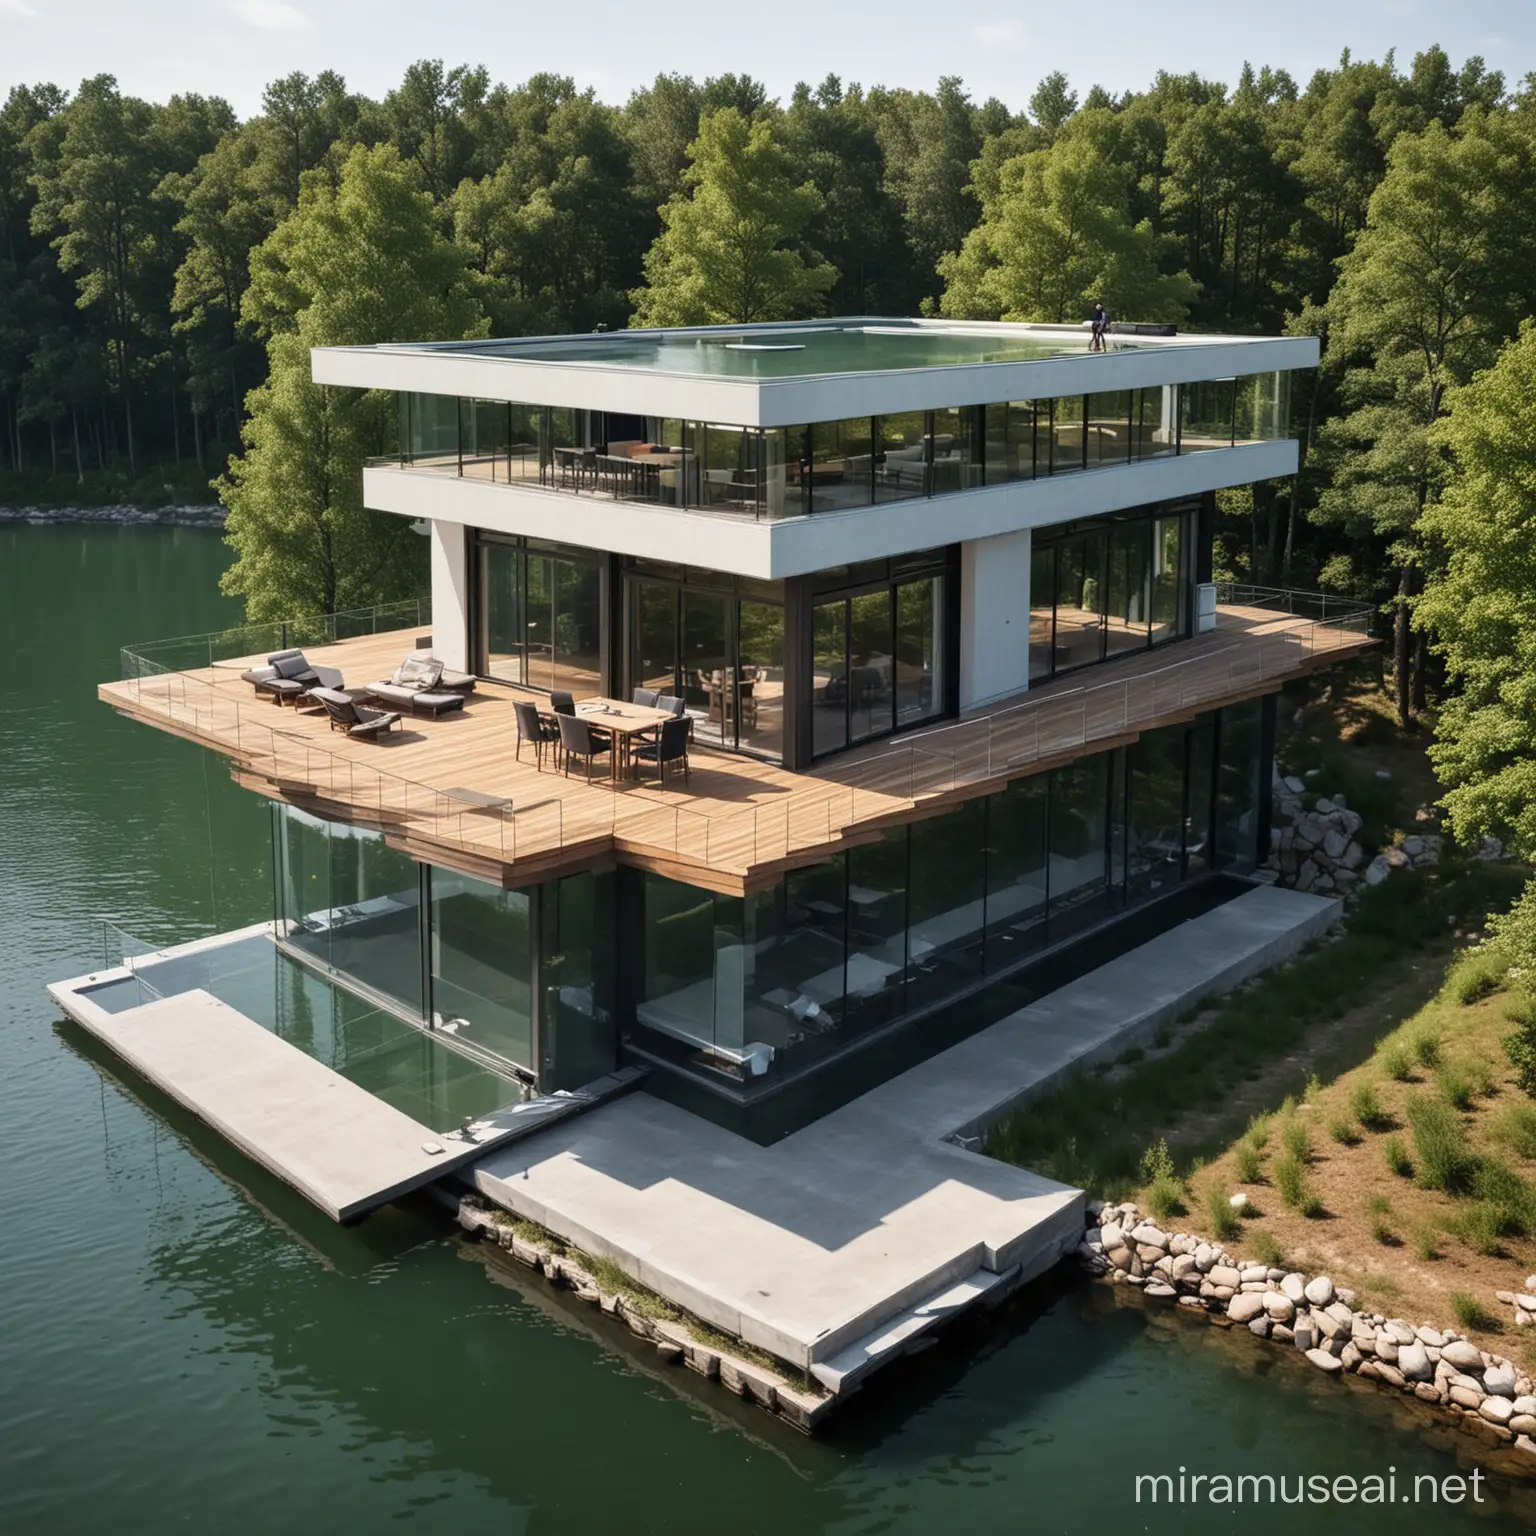 lake architecture
more modern
+more high tech
+rooftop terrace
+SIMPLE
+1 FLOOR